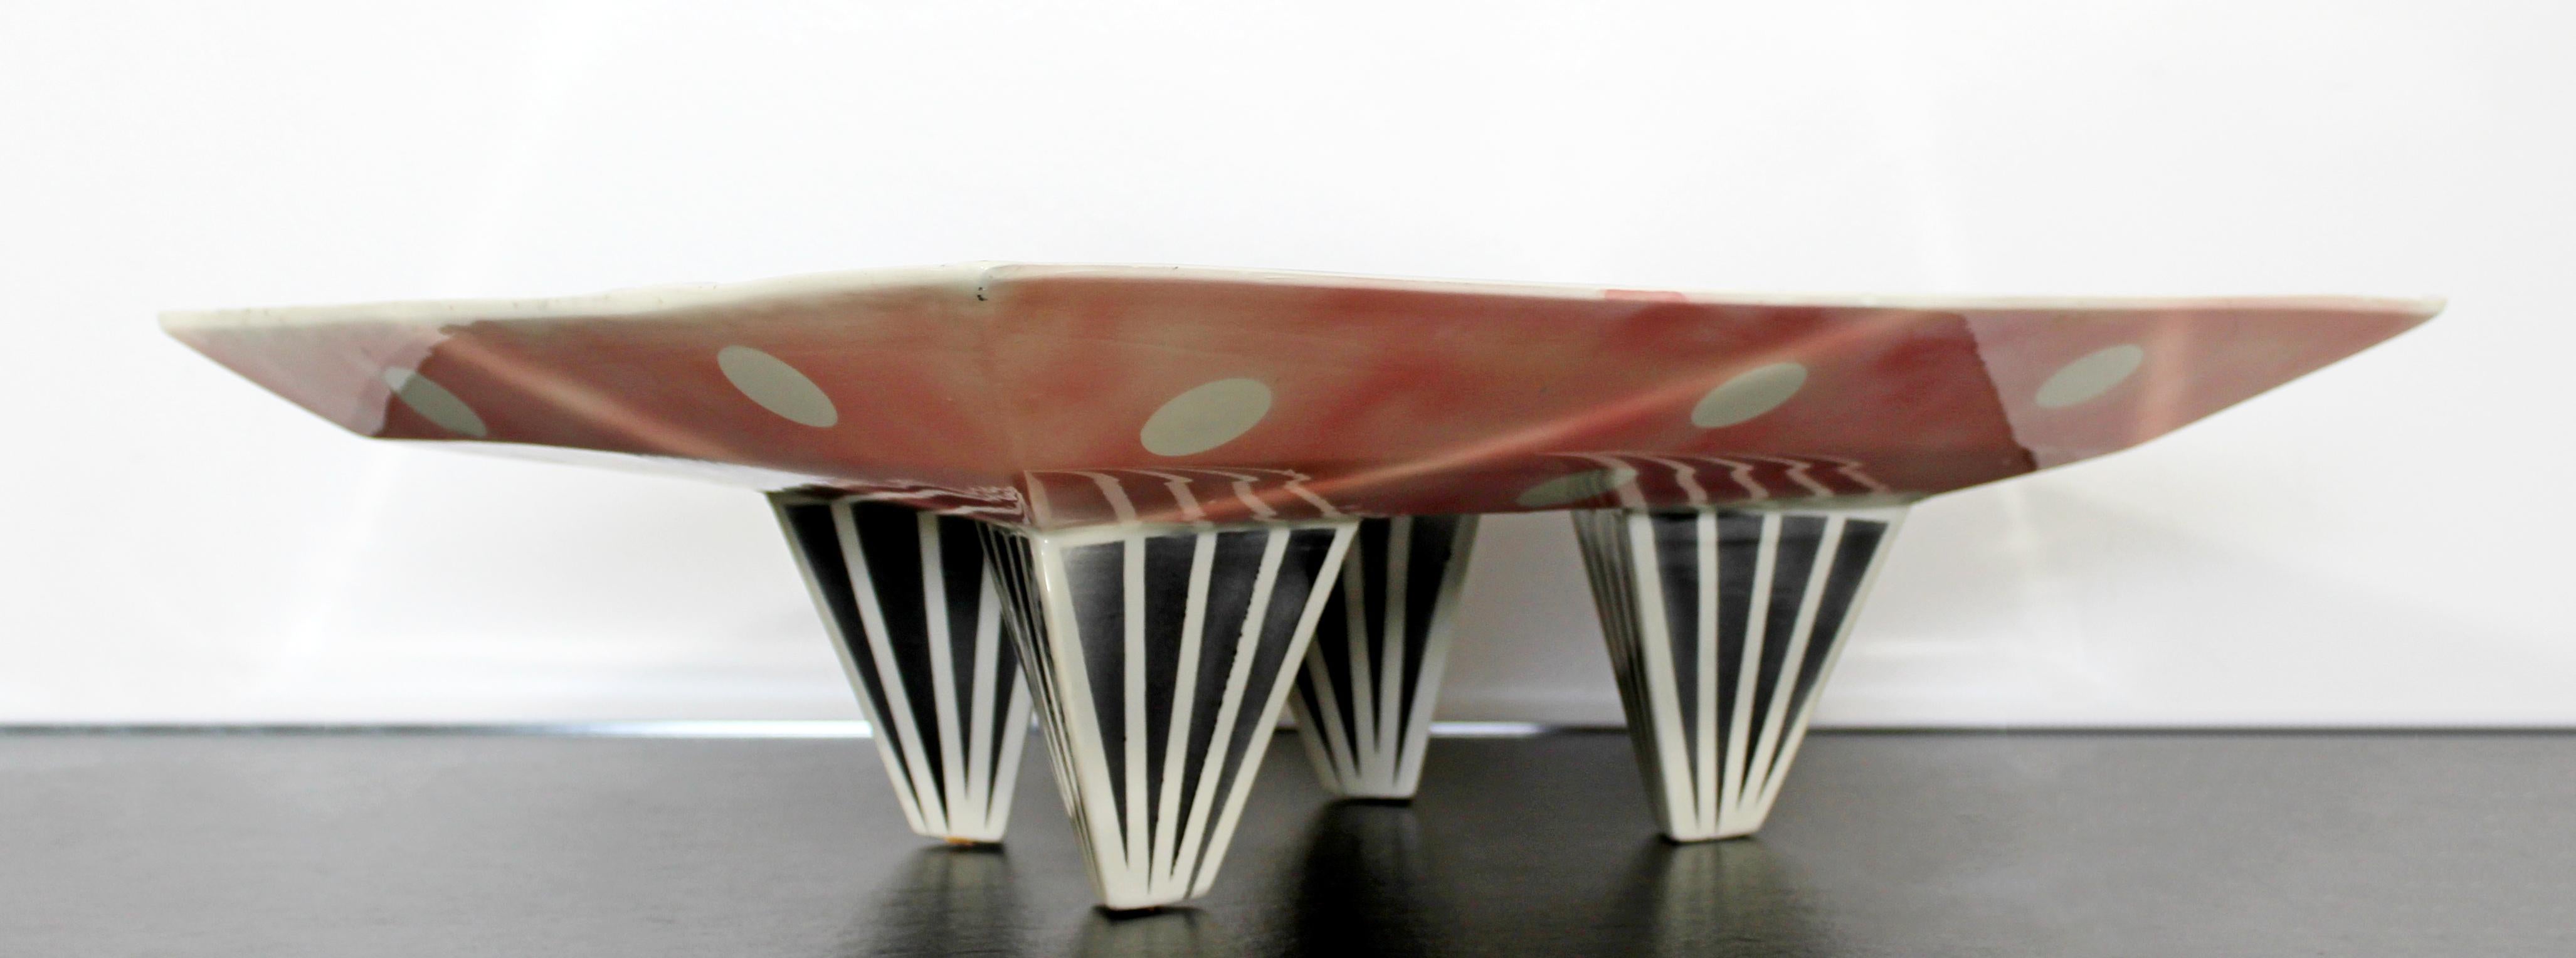 Contemporary Modern Rike Moss Signed Ceramic Pottery Centerpiece Tray Legs 1980s For Sale 3